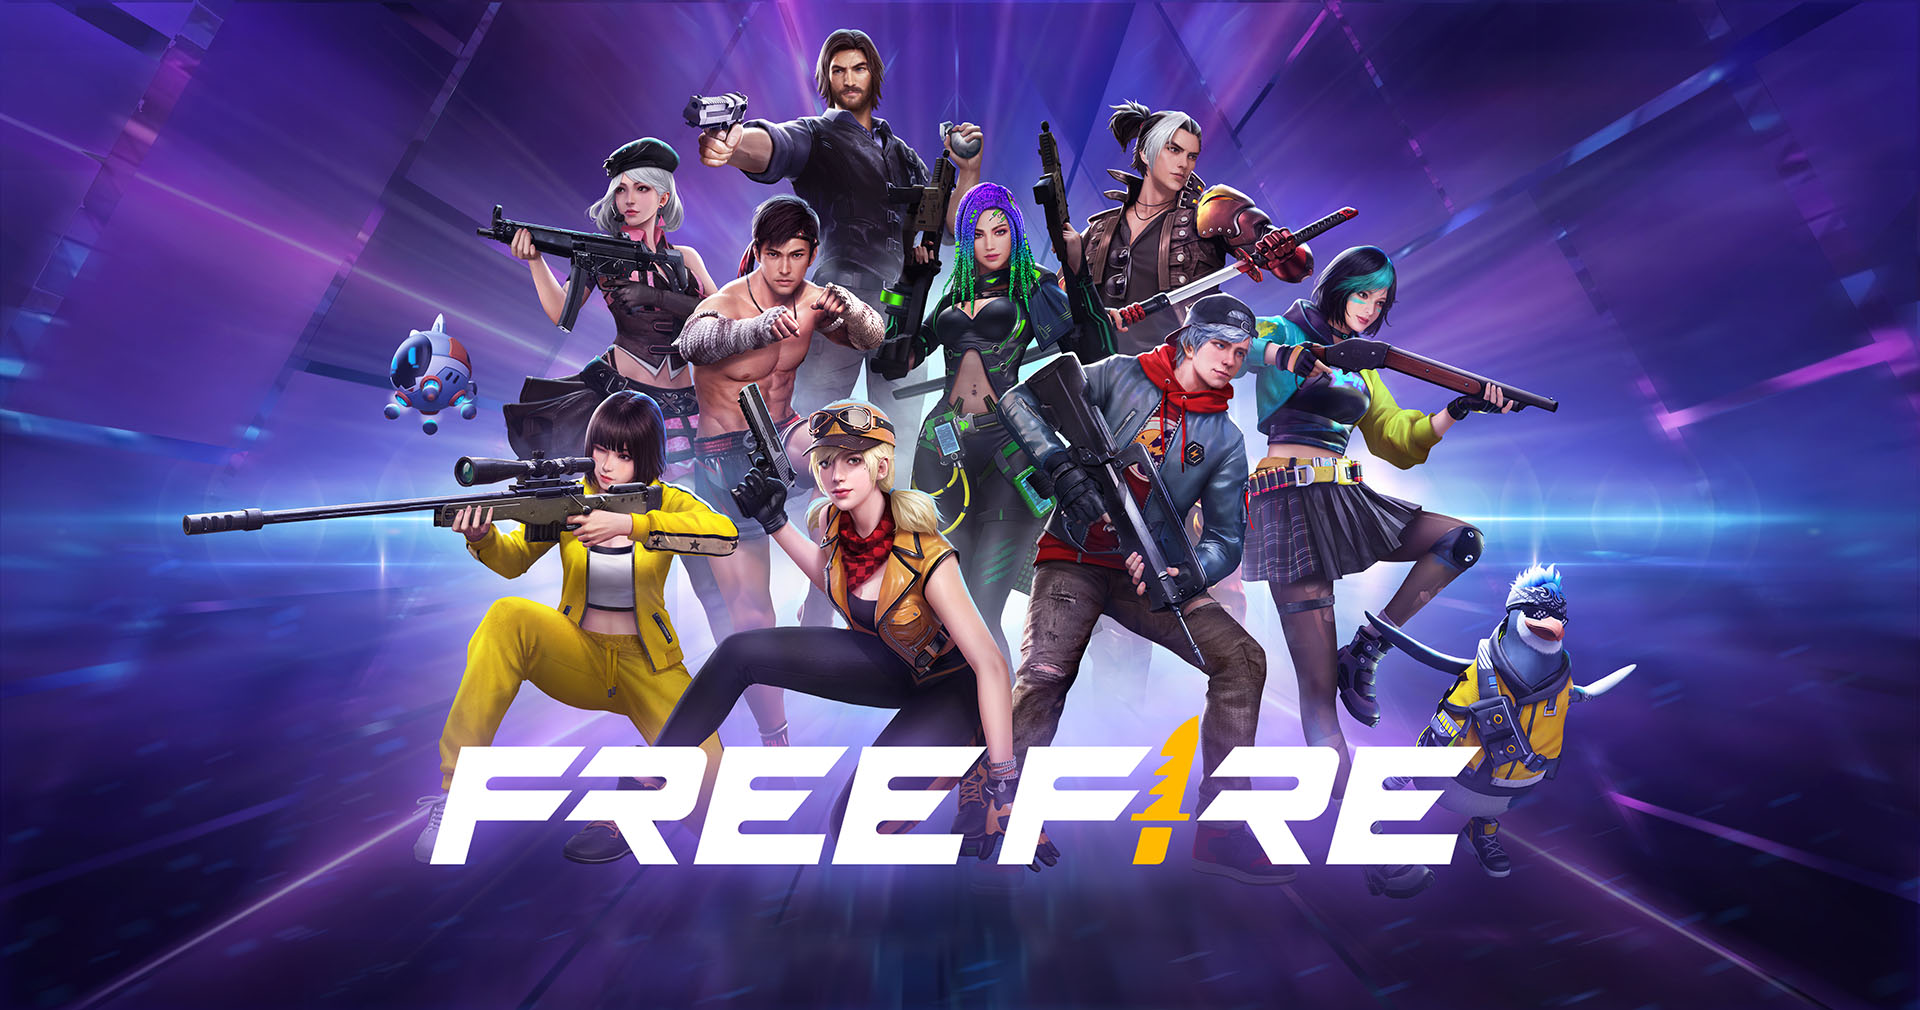 Free Fire unveils new logo ahead of its planned brand refresh in July